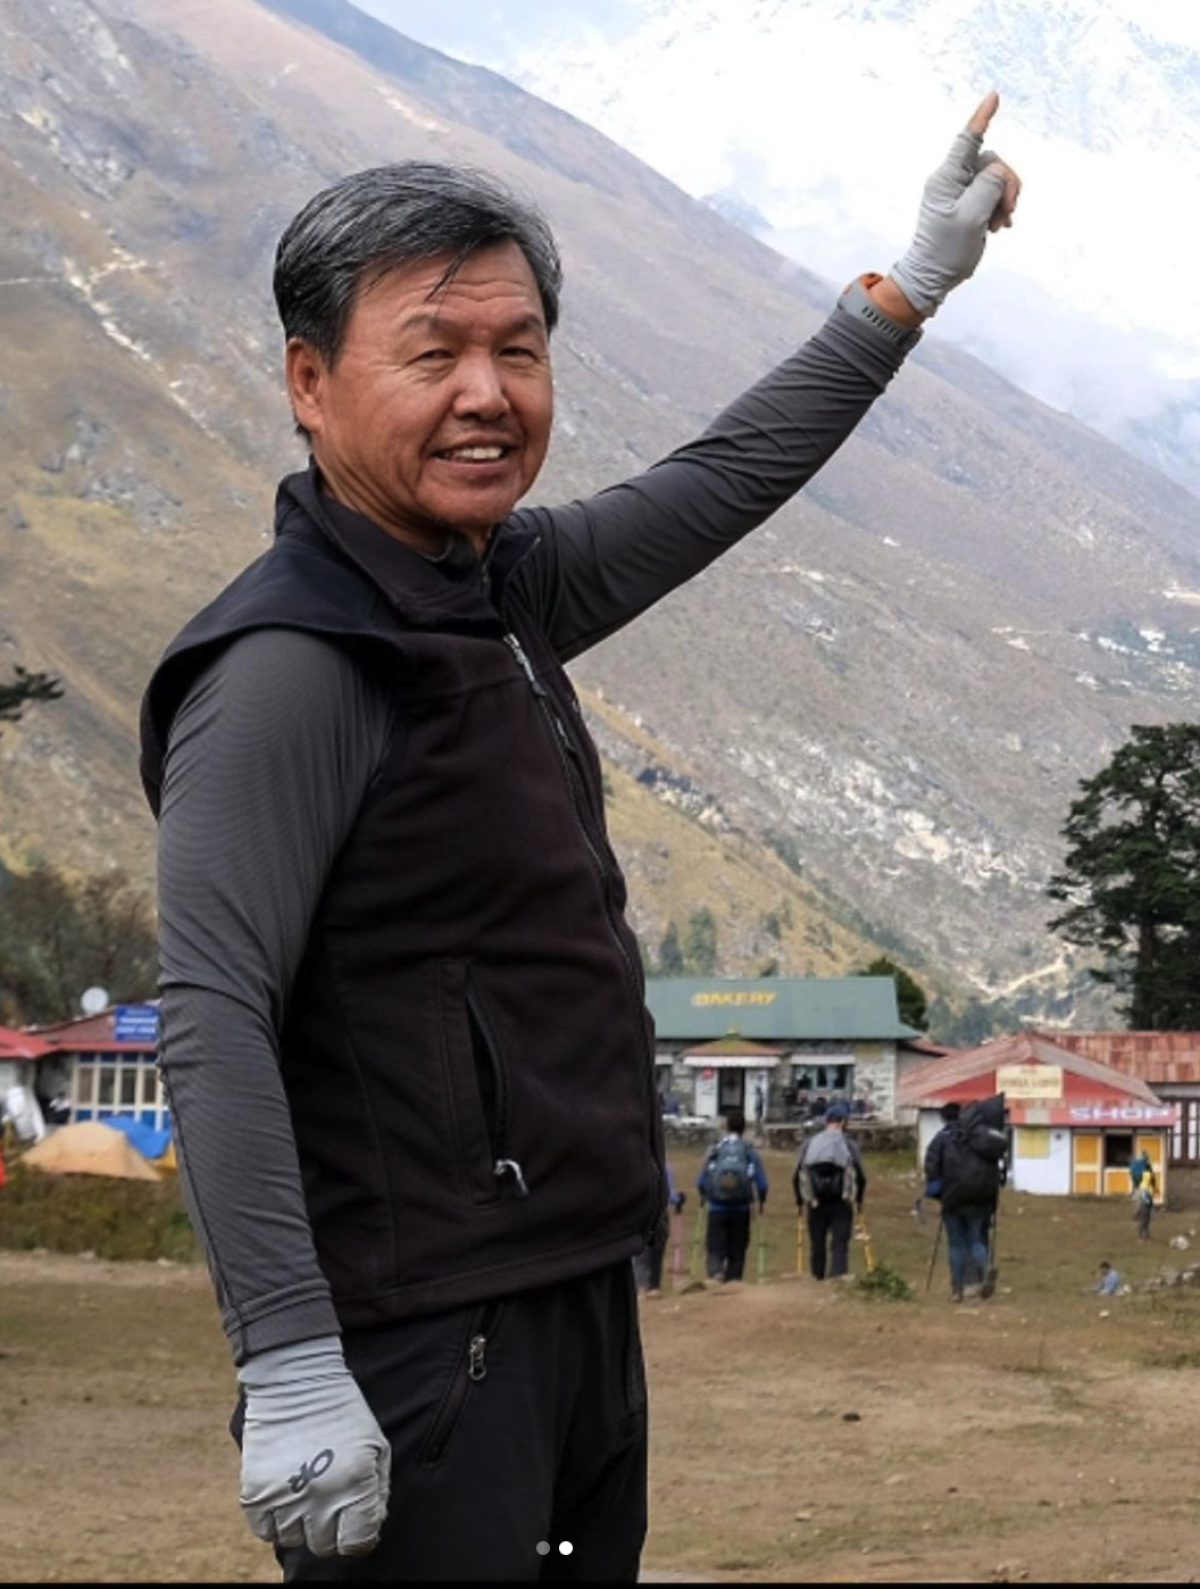 A man standing in an open area in front of a mountain points at the sky.